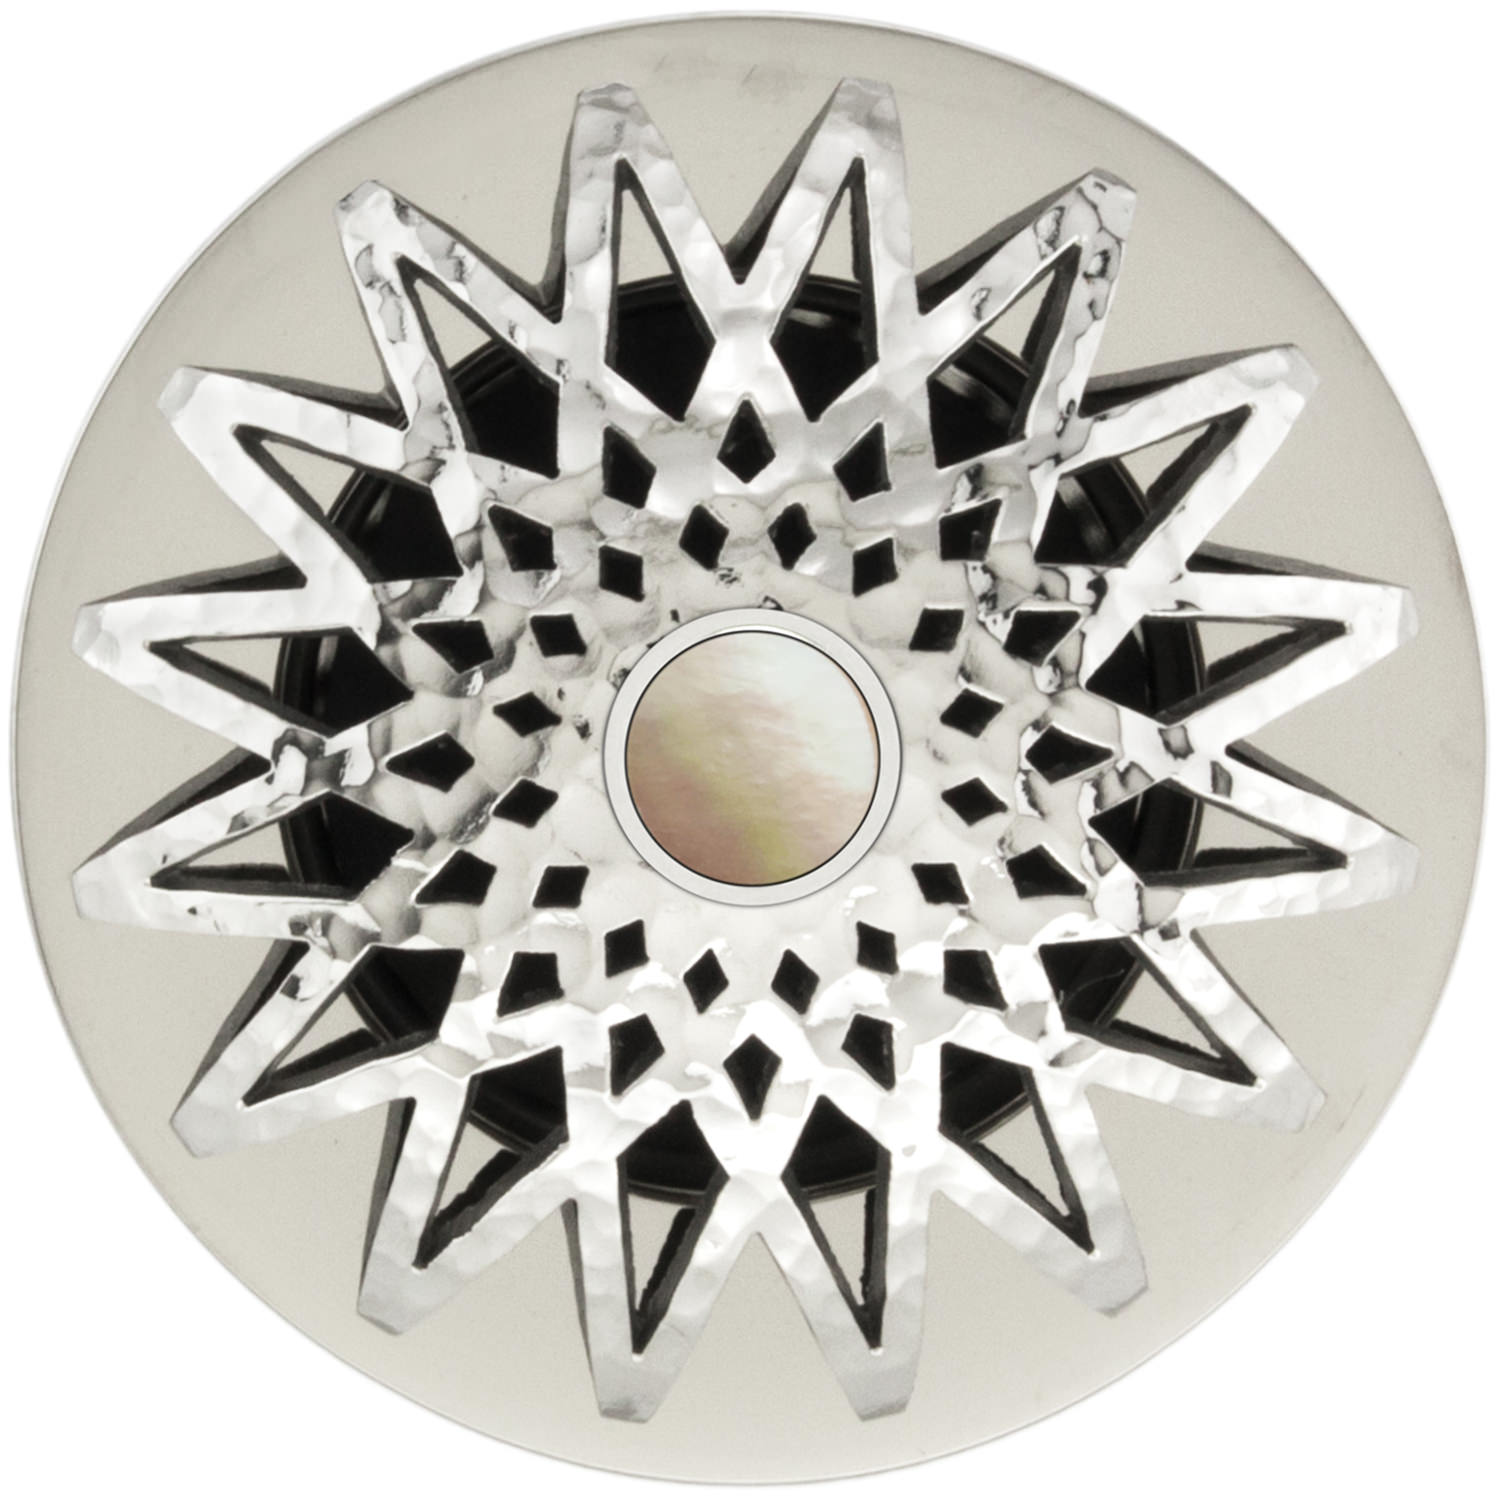 Linkasink Drains - Decorative Grid Strainer 1.5" - Star D015 PH-SCR02-N - Hammered - Mother of Pearl Screw